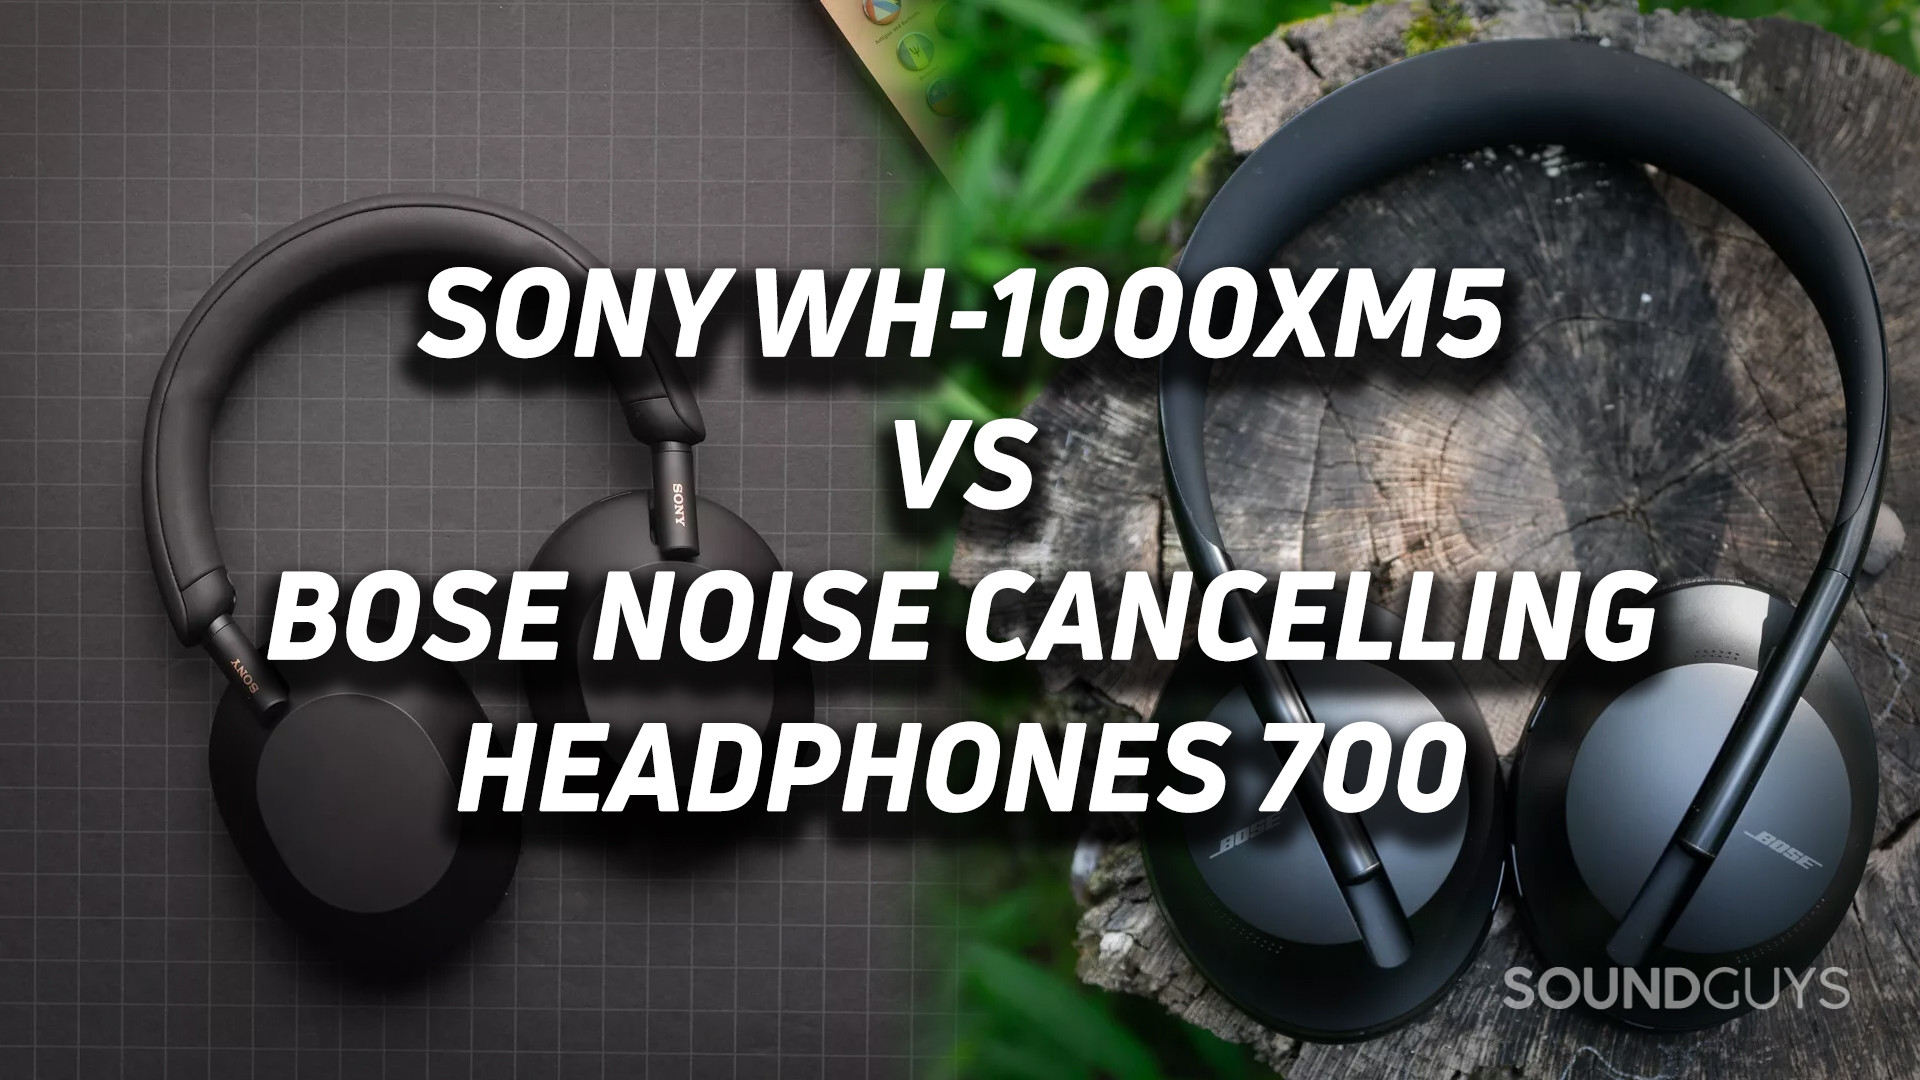 Sony WH-1000XM5: The Flagship Gets Even Better